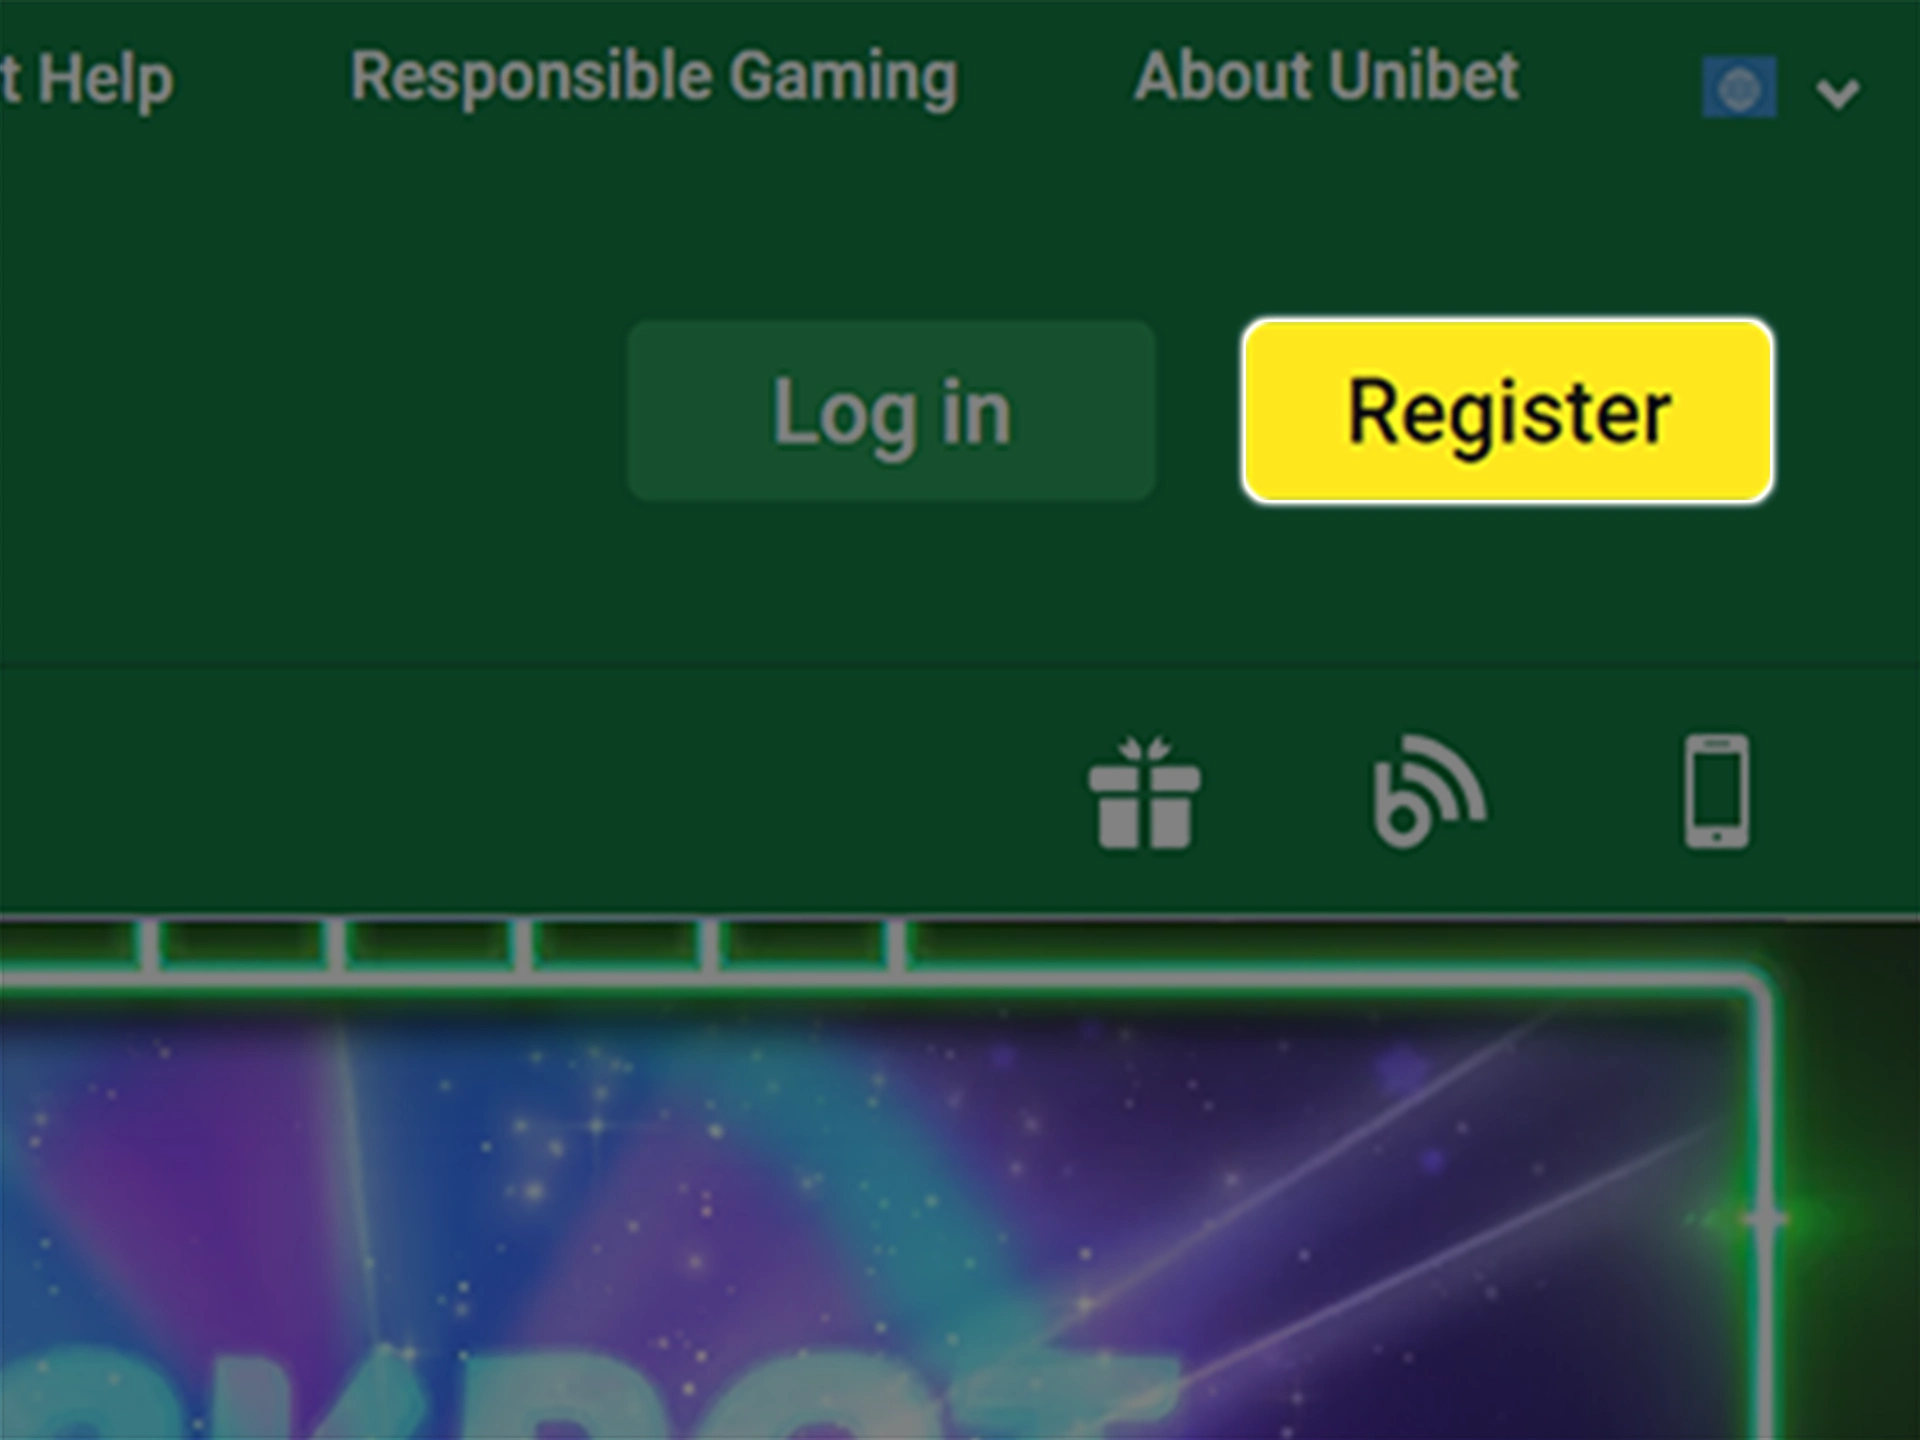 Start your registration at Unibet by clicking on the button.